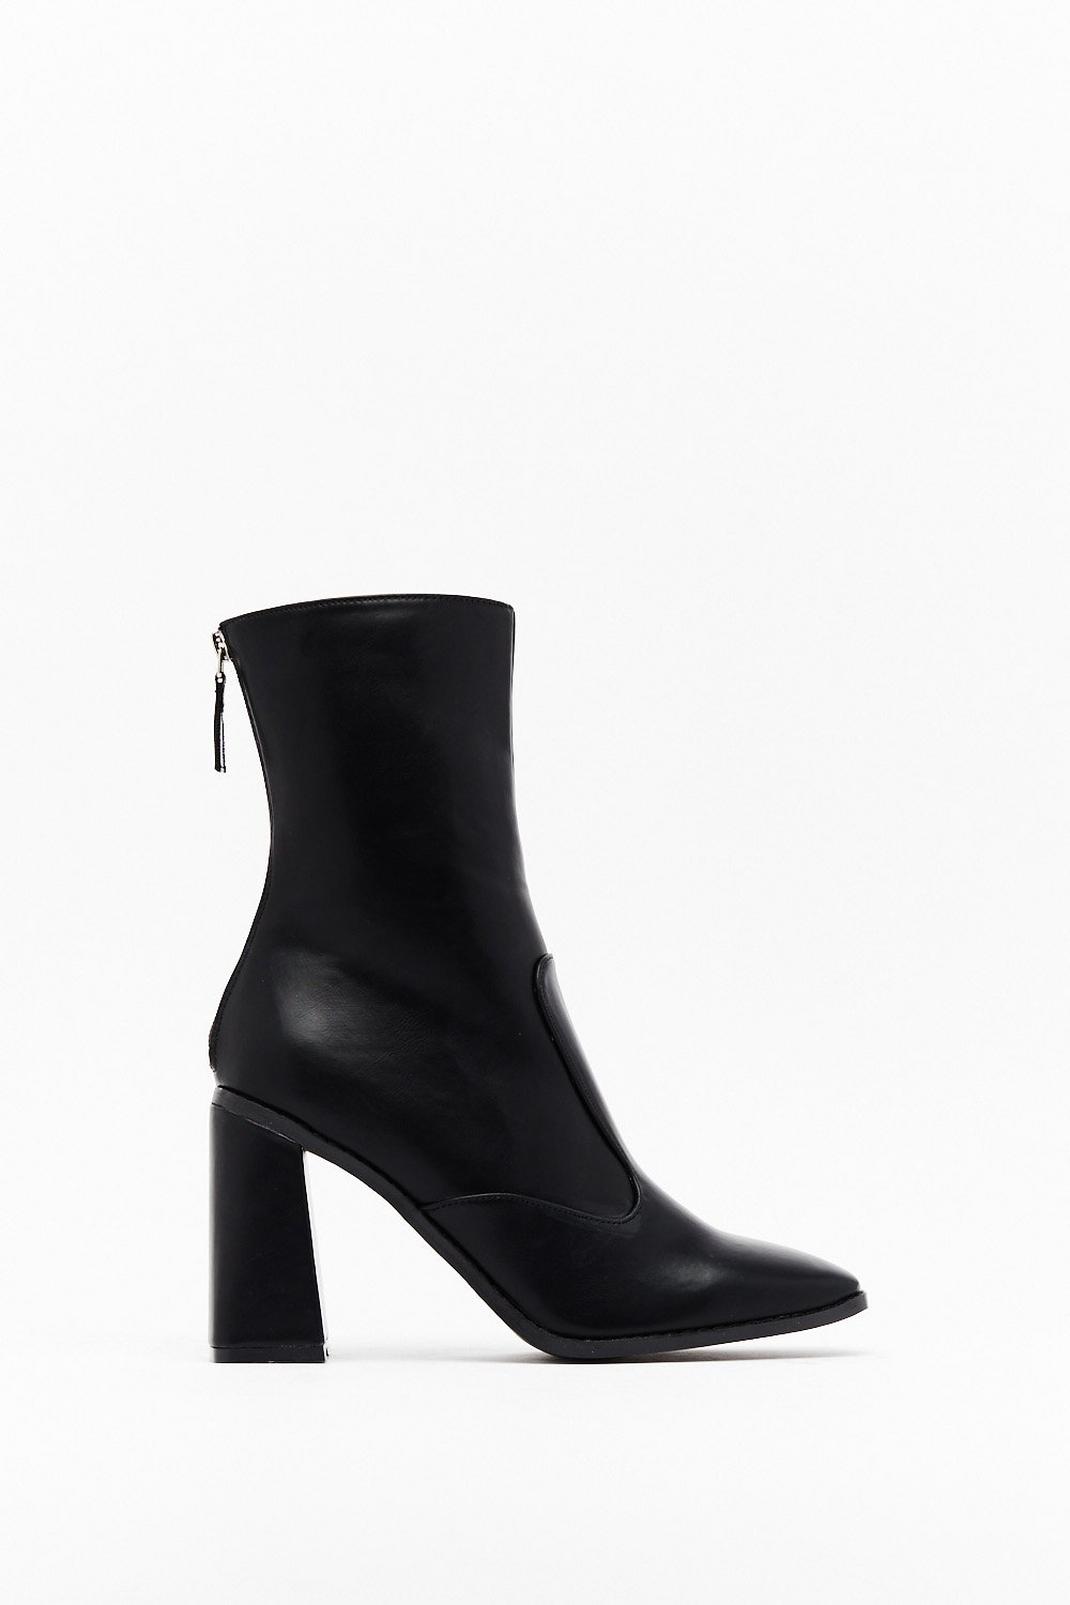 Not a Flare in the World Faux Leather Boots | Nasty Gal